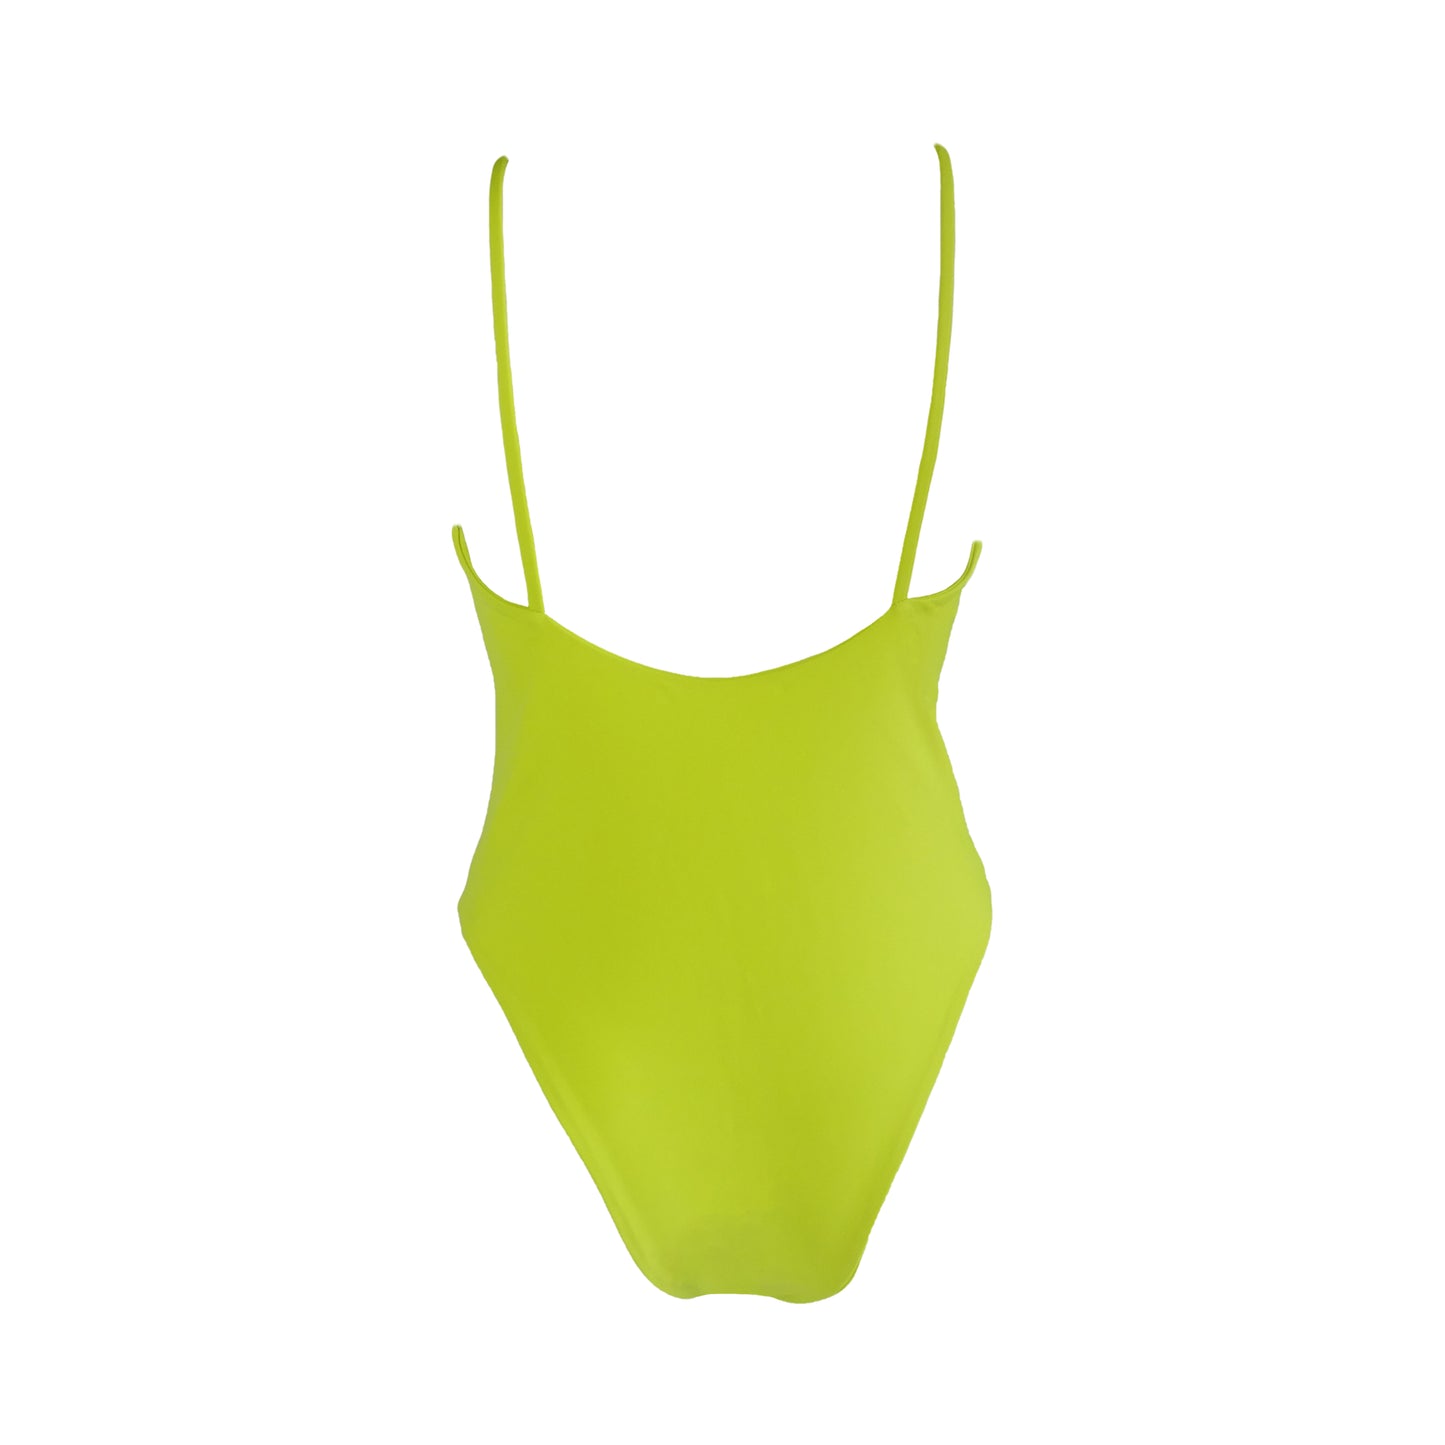 Back view of Asymmetric plunging v-neck one piece swimsuit with strap across connecting the front straps, high cut legs, and cheeky bum coverage.